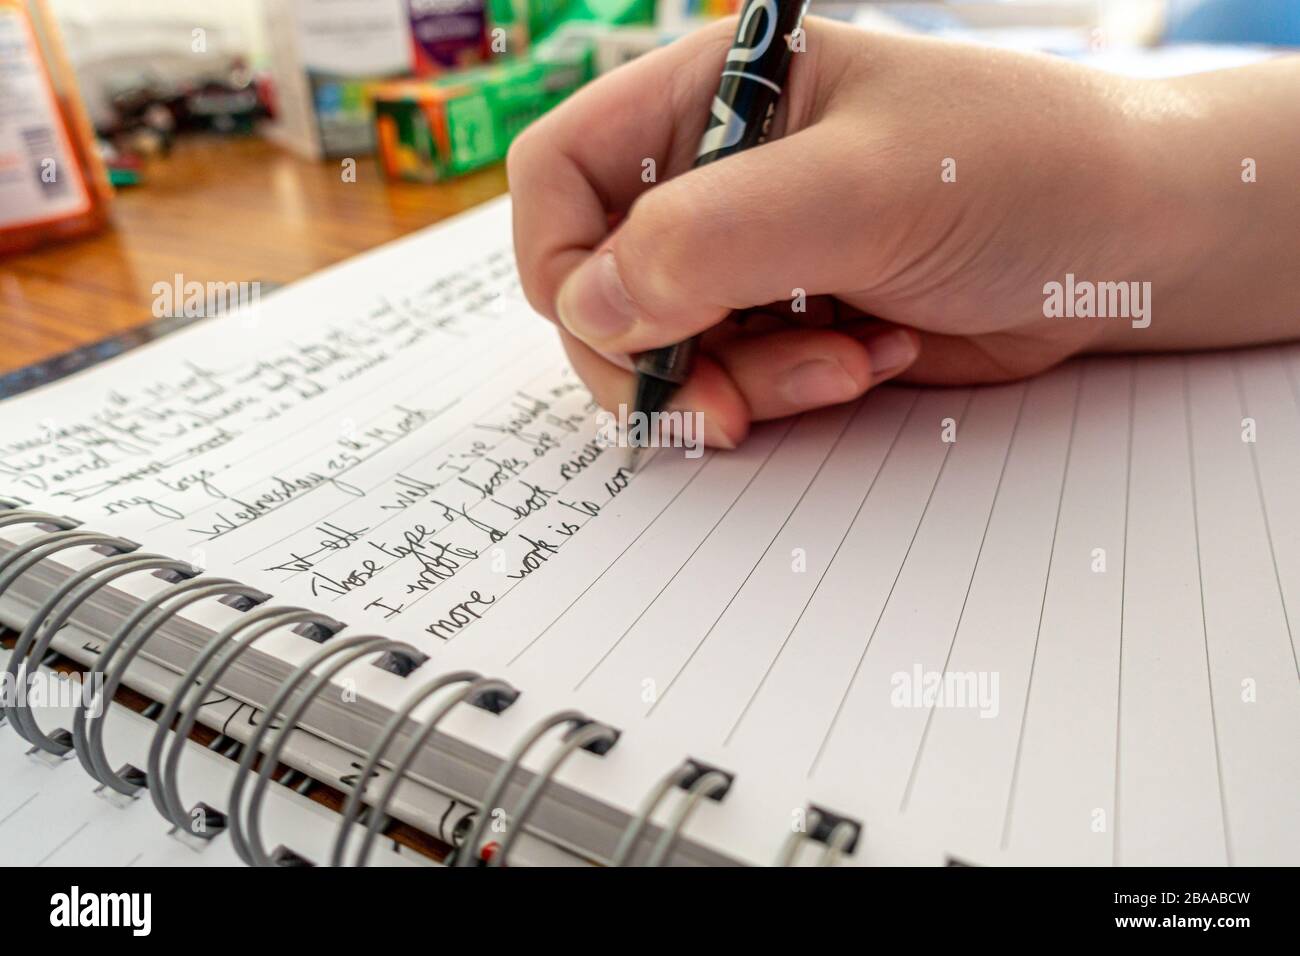 A young boy writes a diary of events during coronavirus lockdown as handwriting practice and to remember current events in the future. Stock Photo